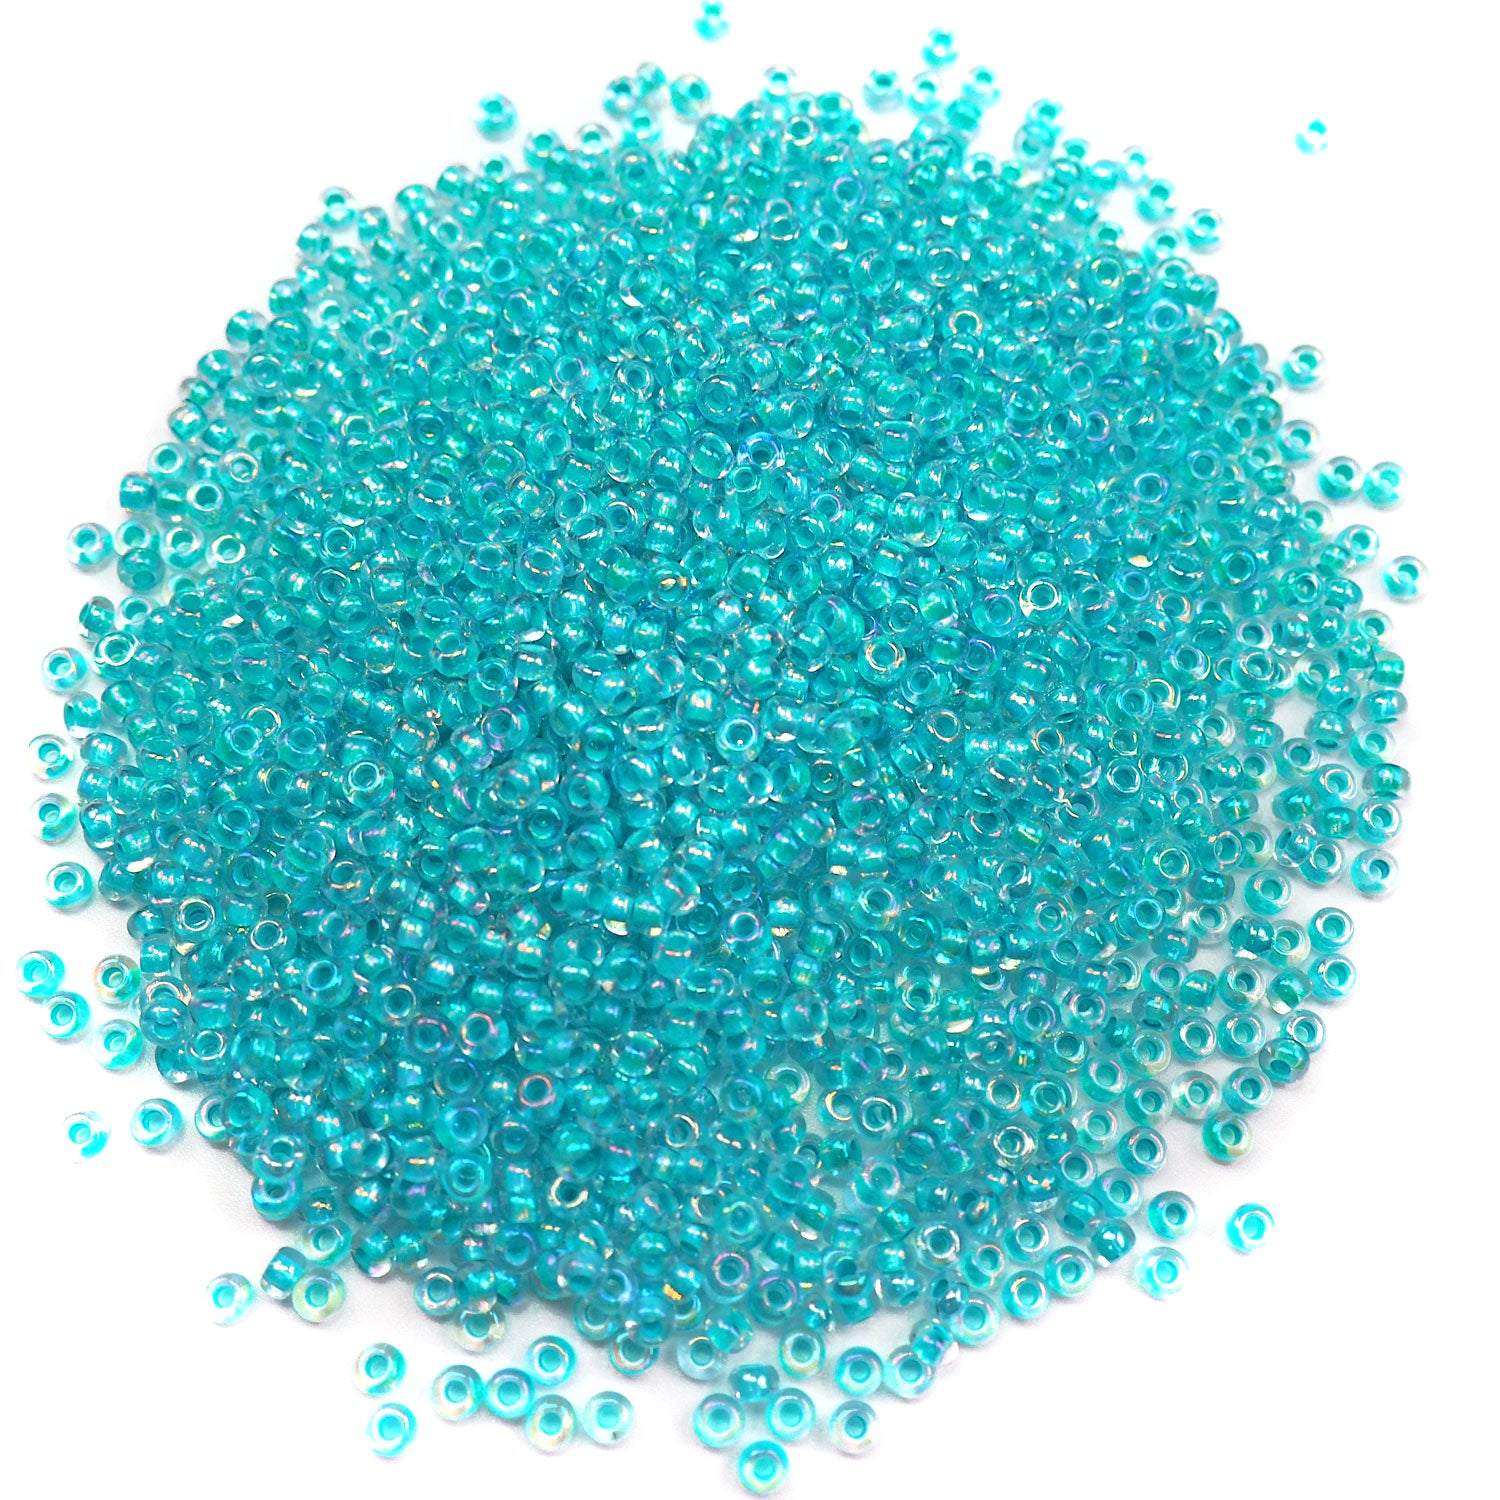 Rocailles size 9/0 (2.6mm) Teal Rainbow Lined, Preciosa Ornela Traditional Czech Glass Seed Beads, 30grams (1 oz), P926